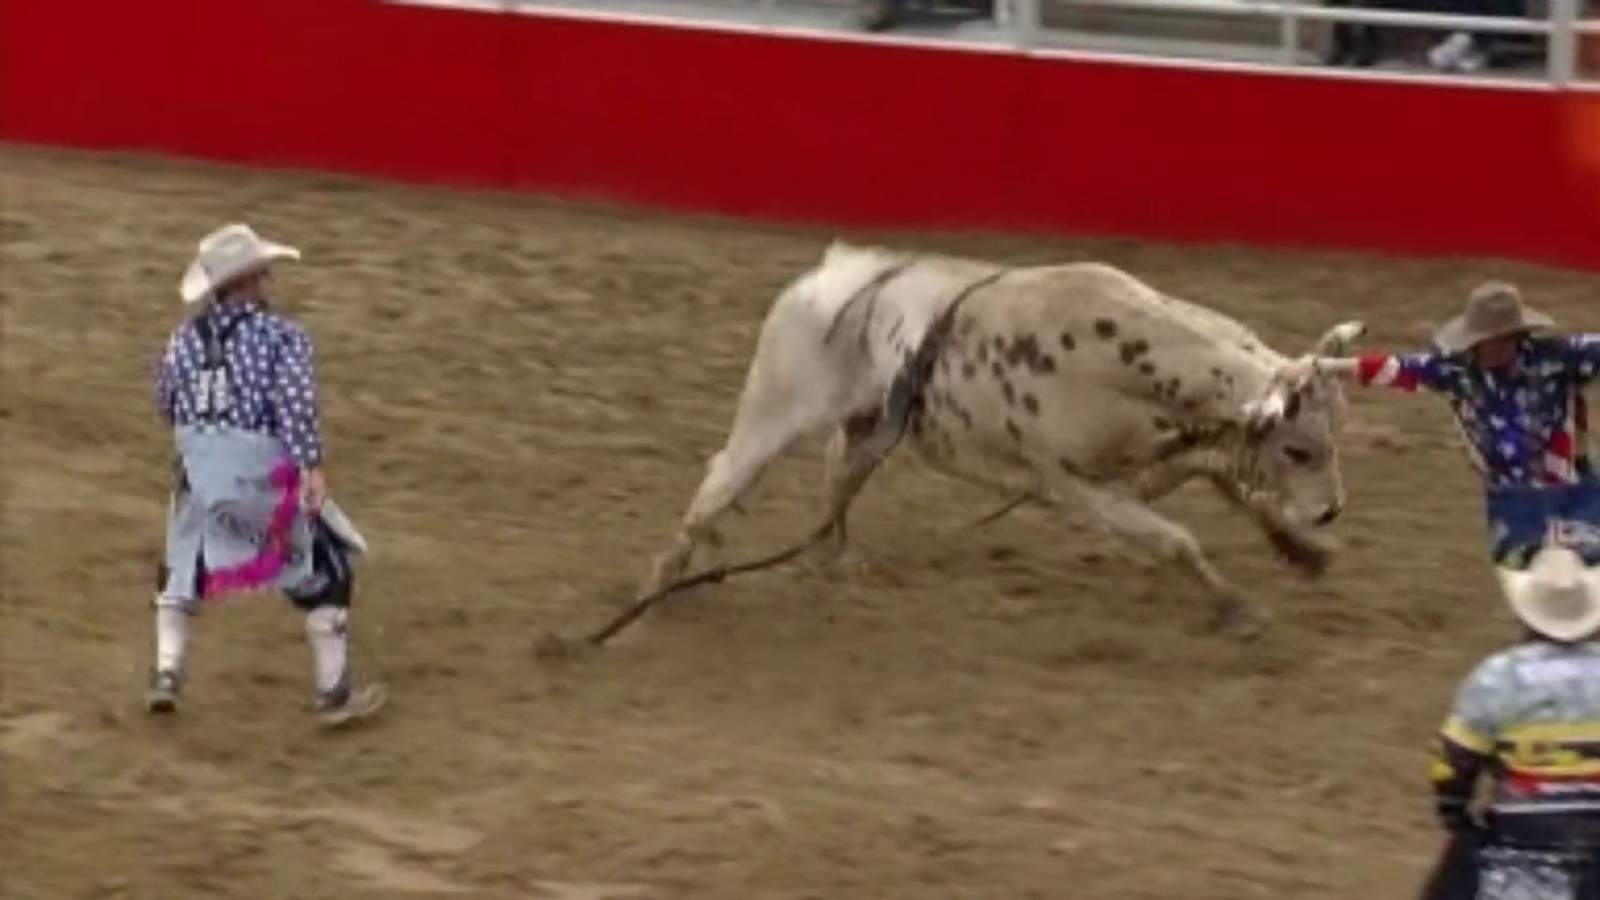 Watch the San Antonio Rodeo from home